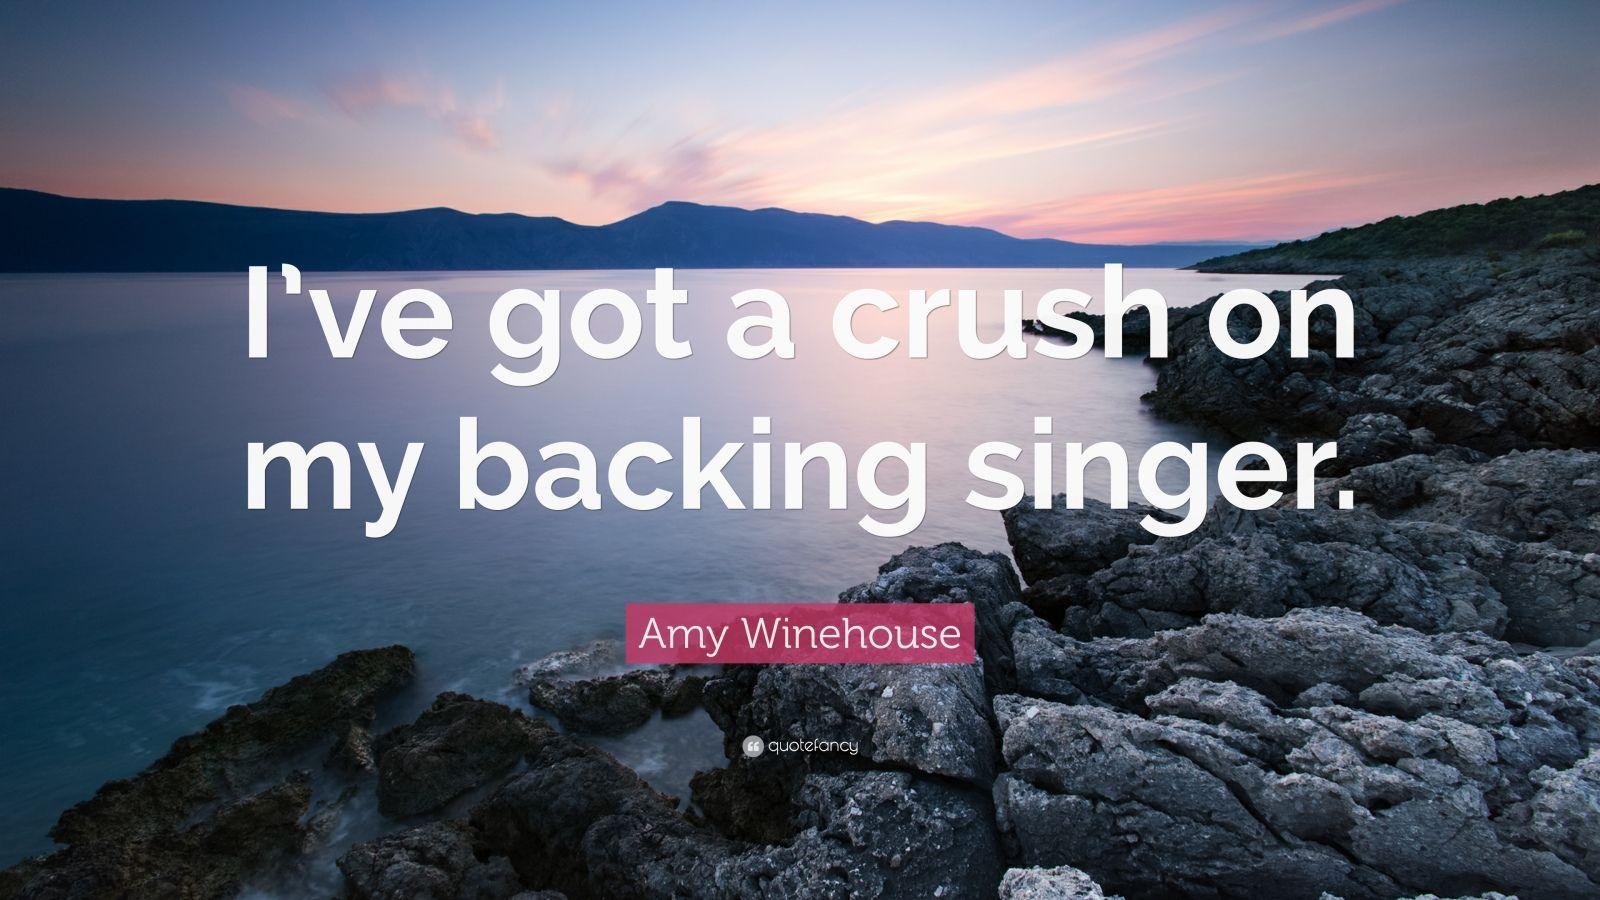 Amy Winehouse Quotes (100 wallpaper)